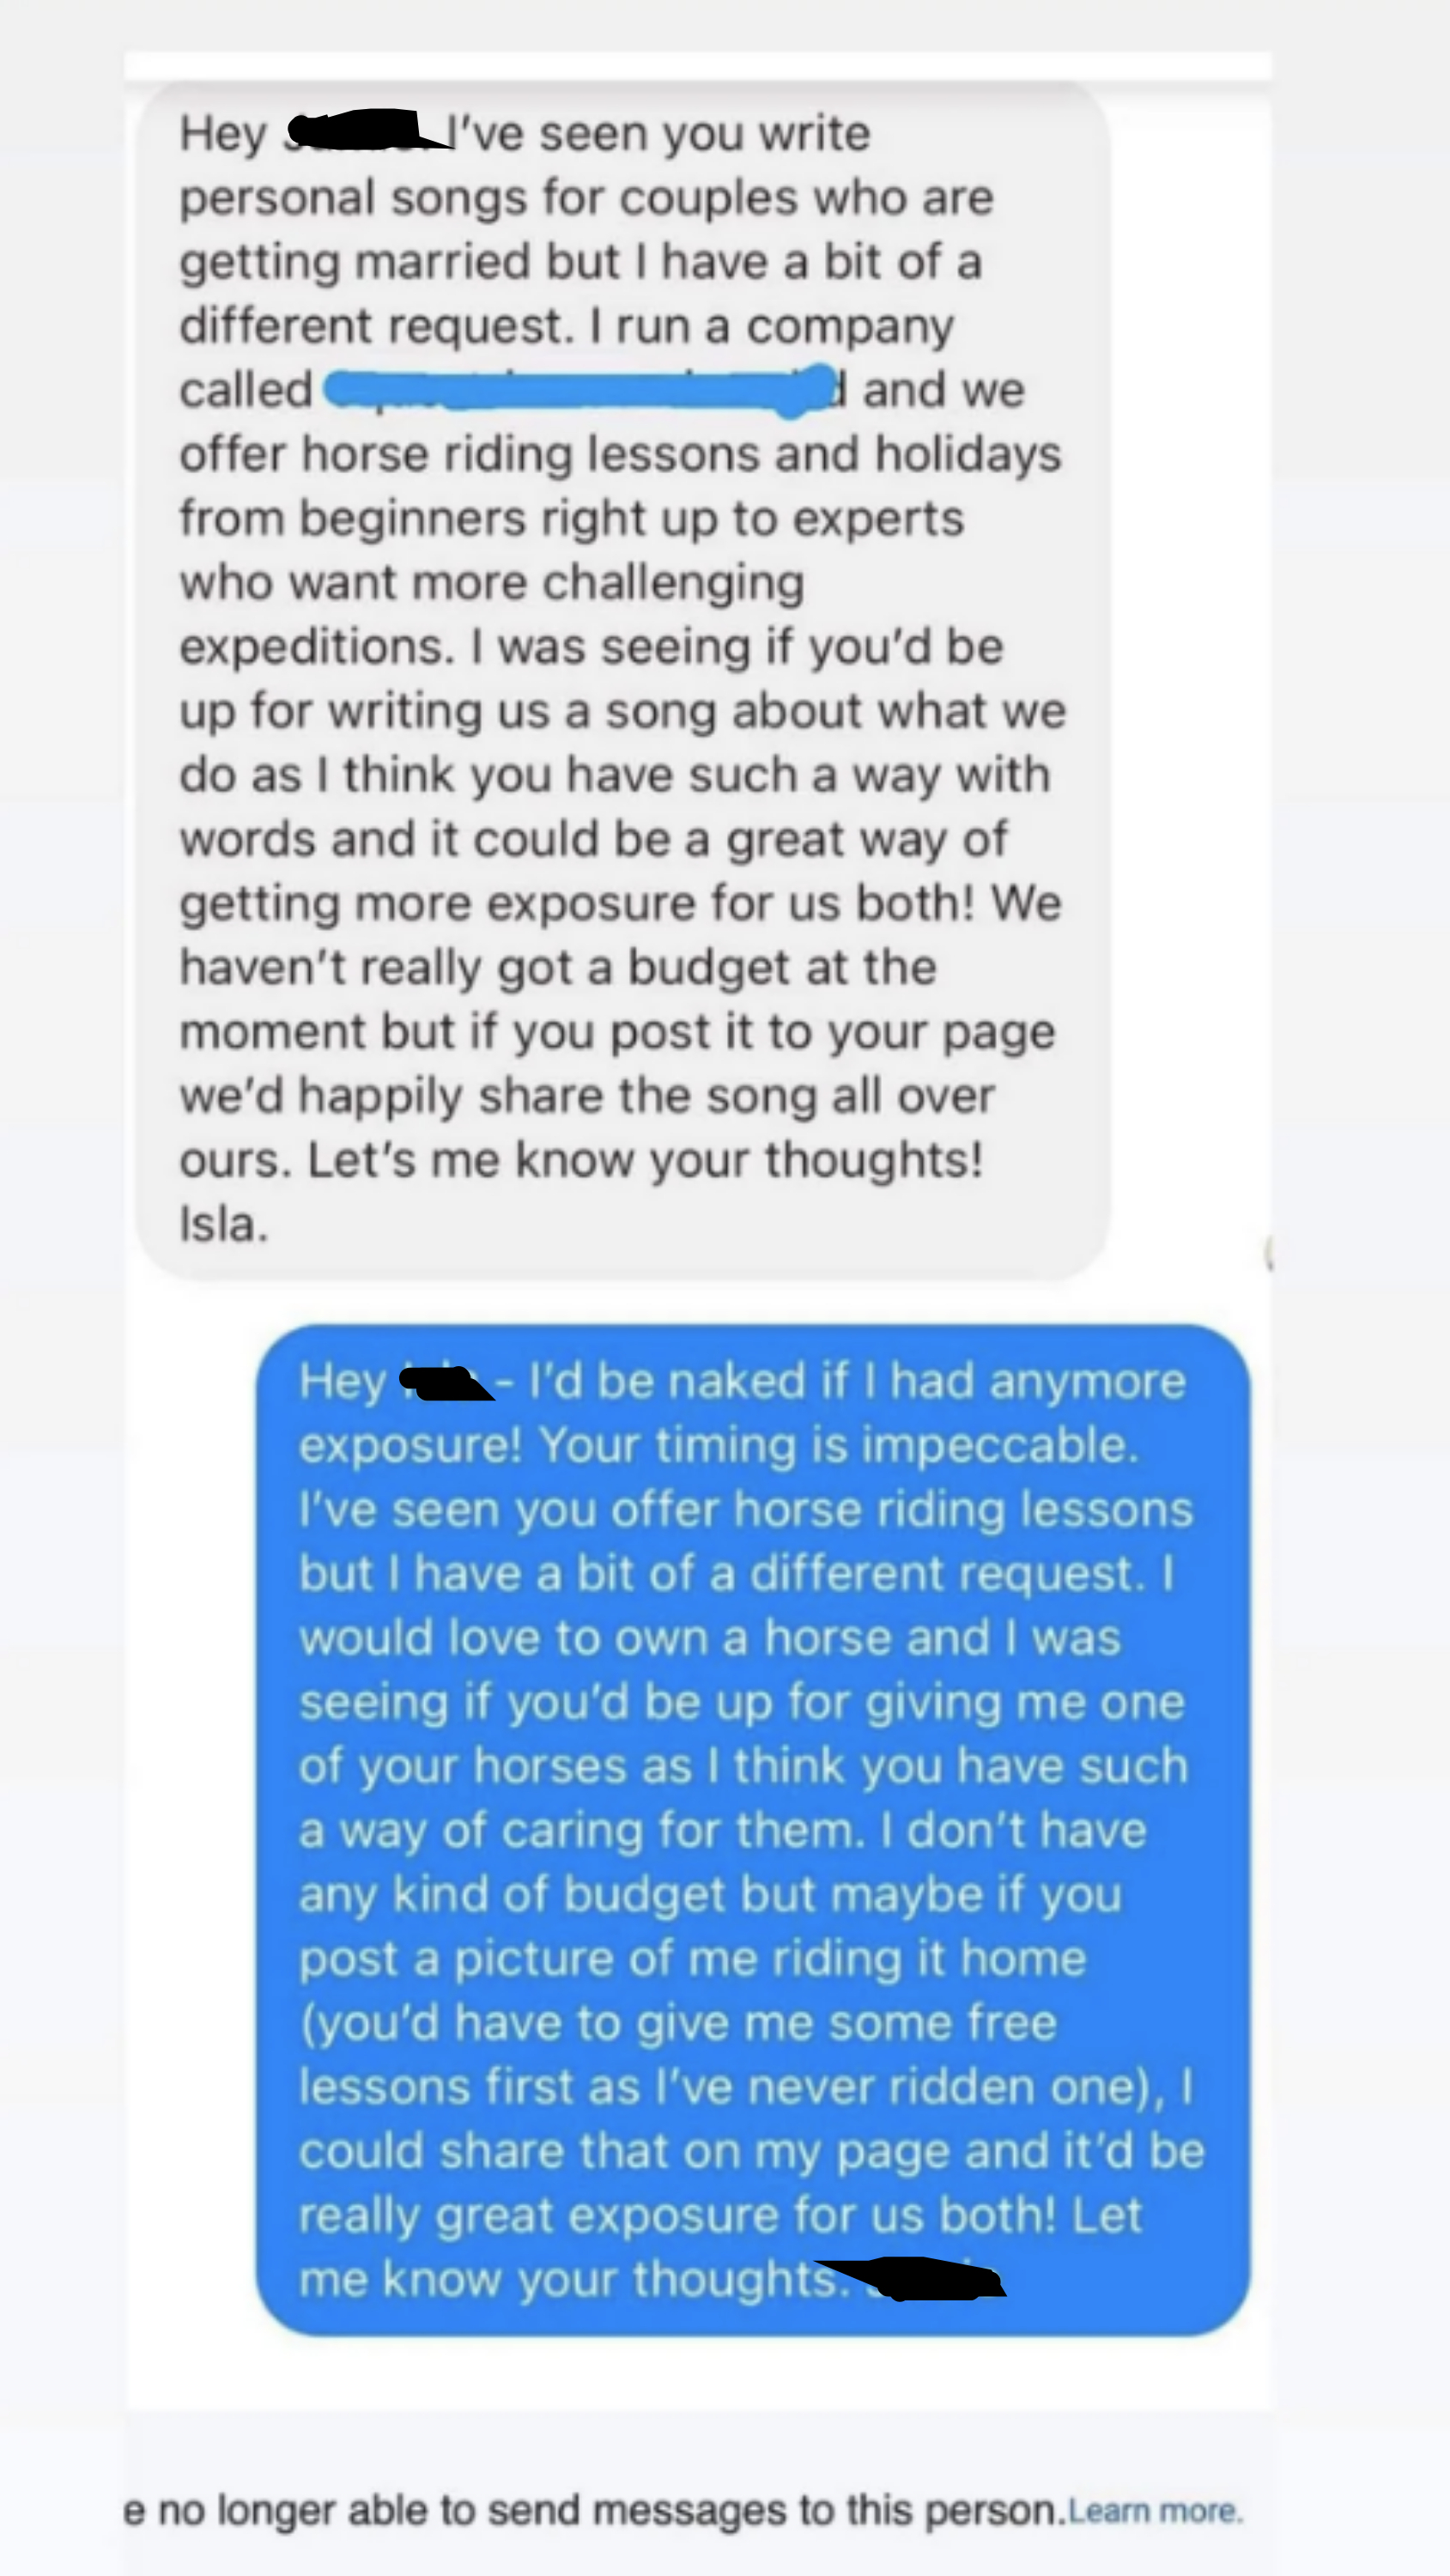 &quot;I could share that on my page and it&#x27;d be really great exposure for us both!&quot;